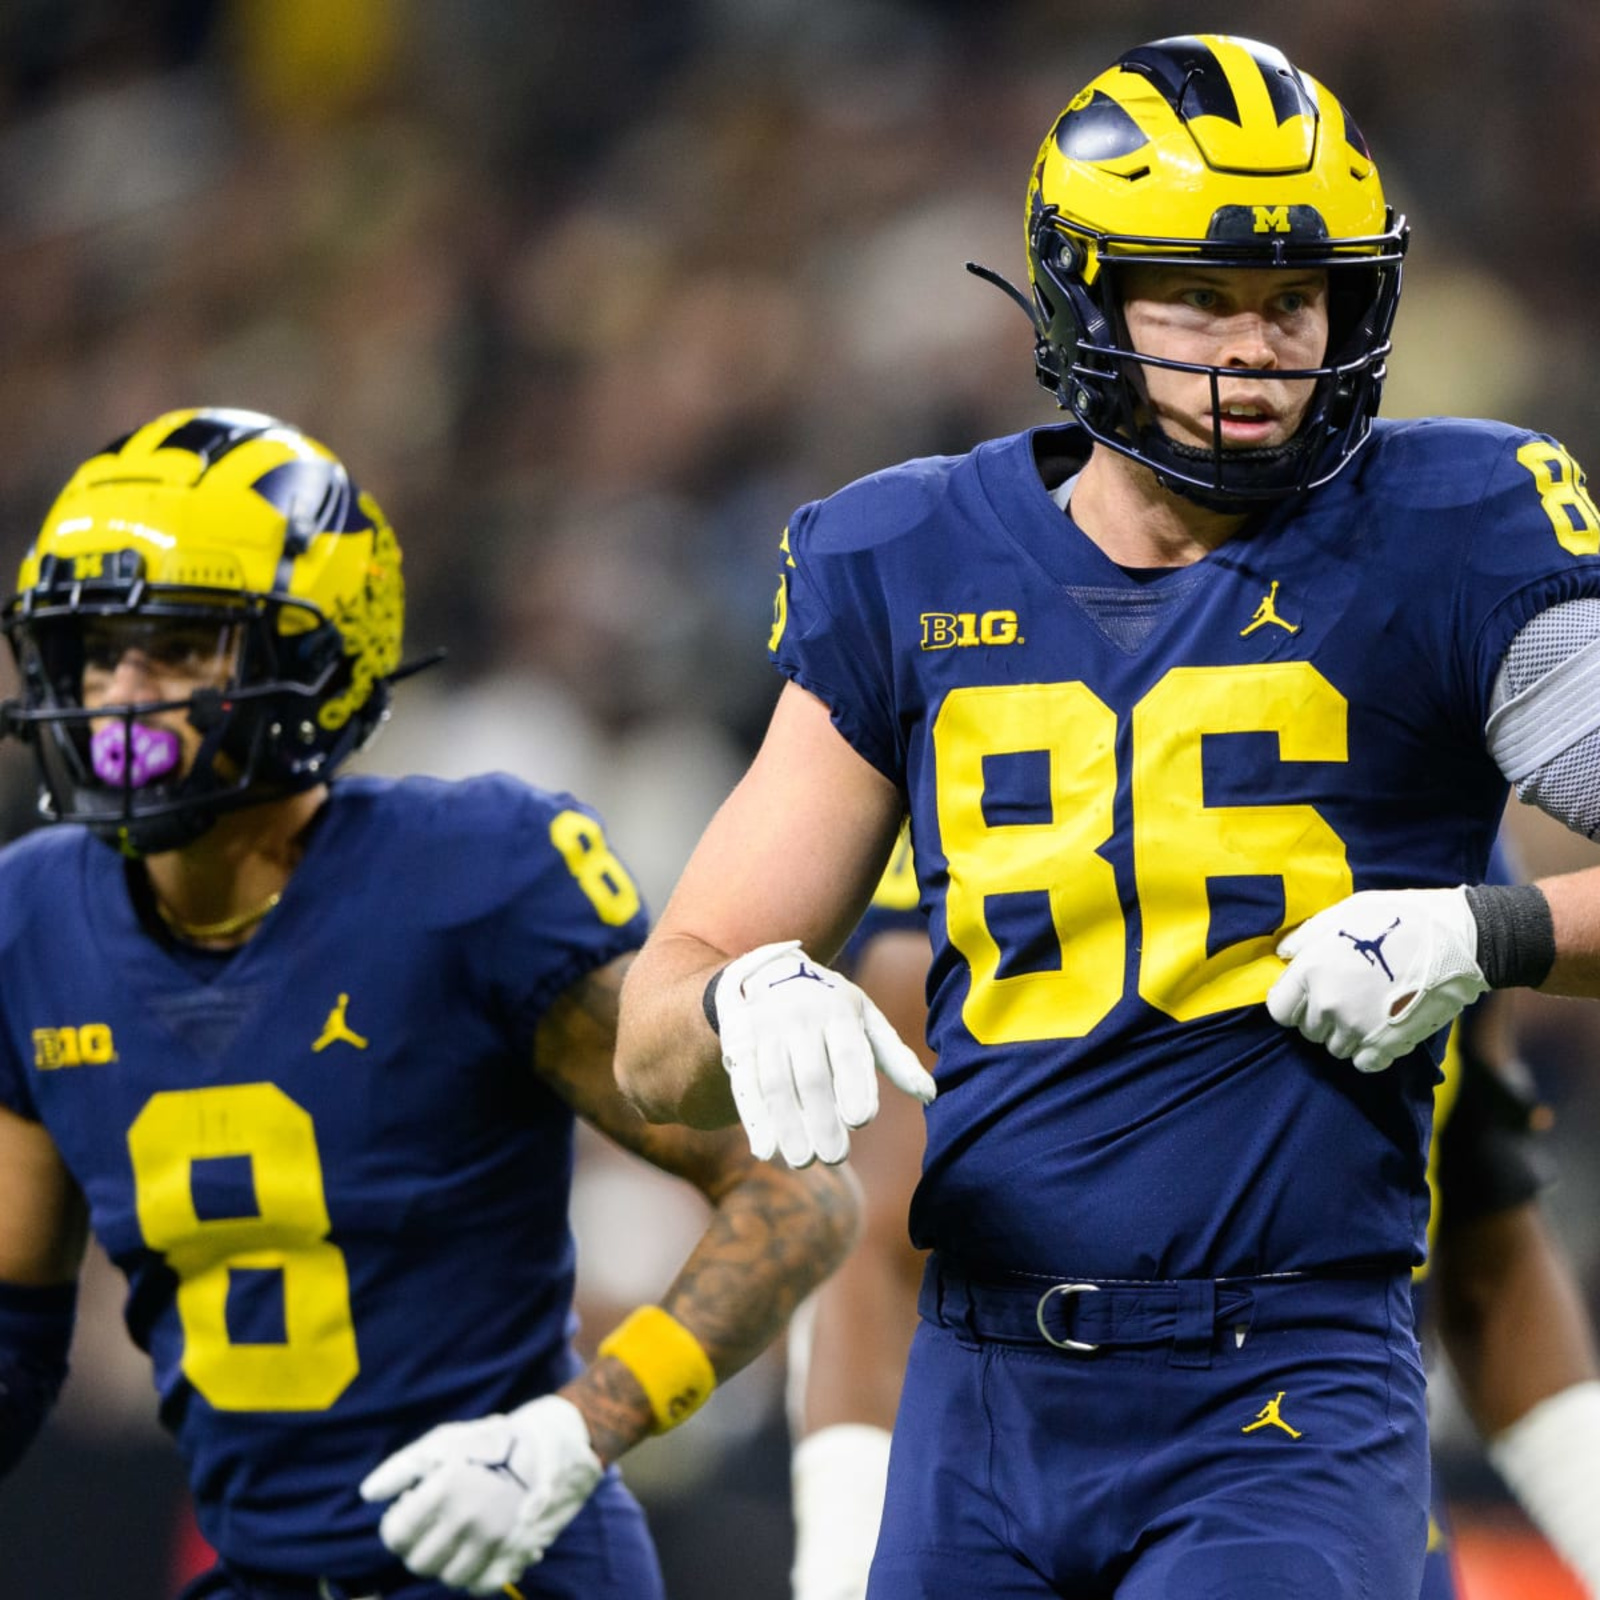 2022 NFL Draft: Week 0 prospects to watch around the country - Page 5